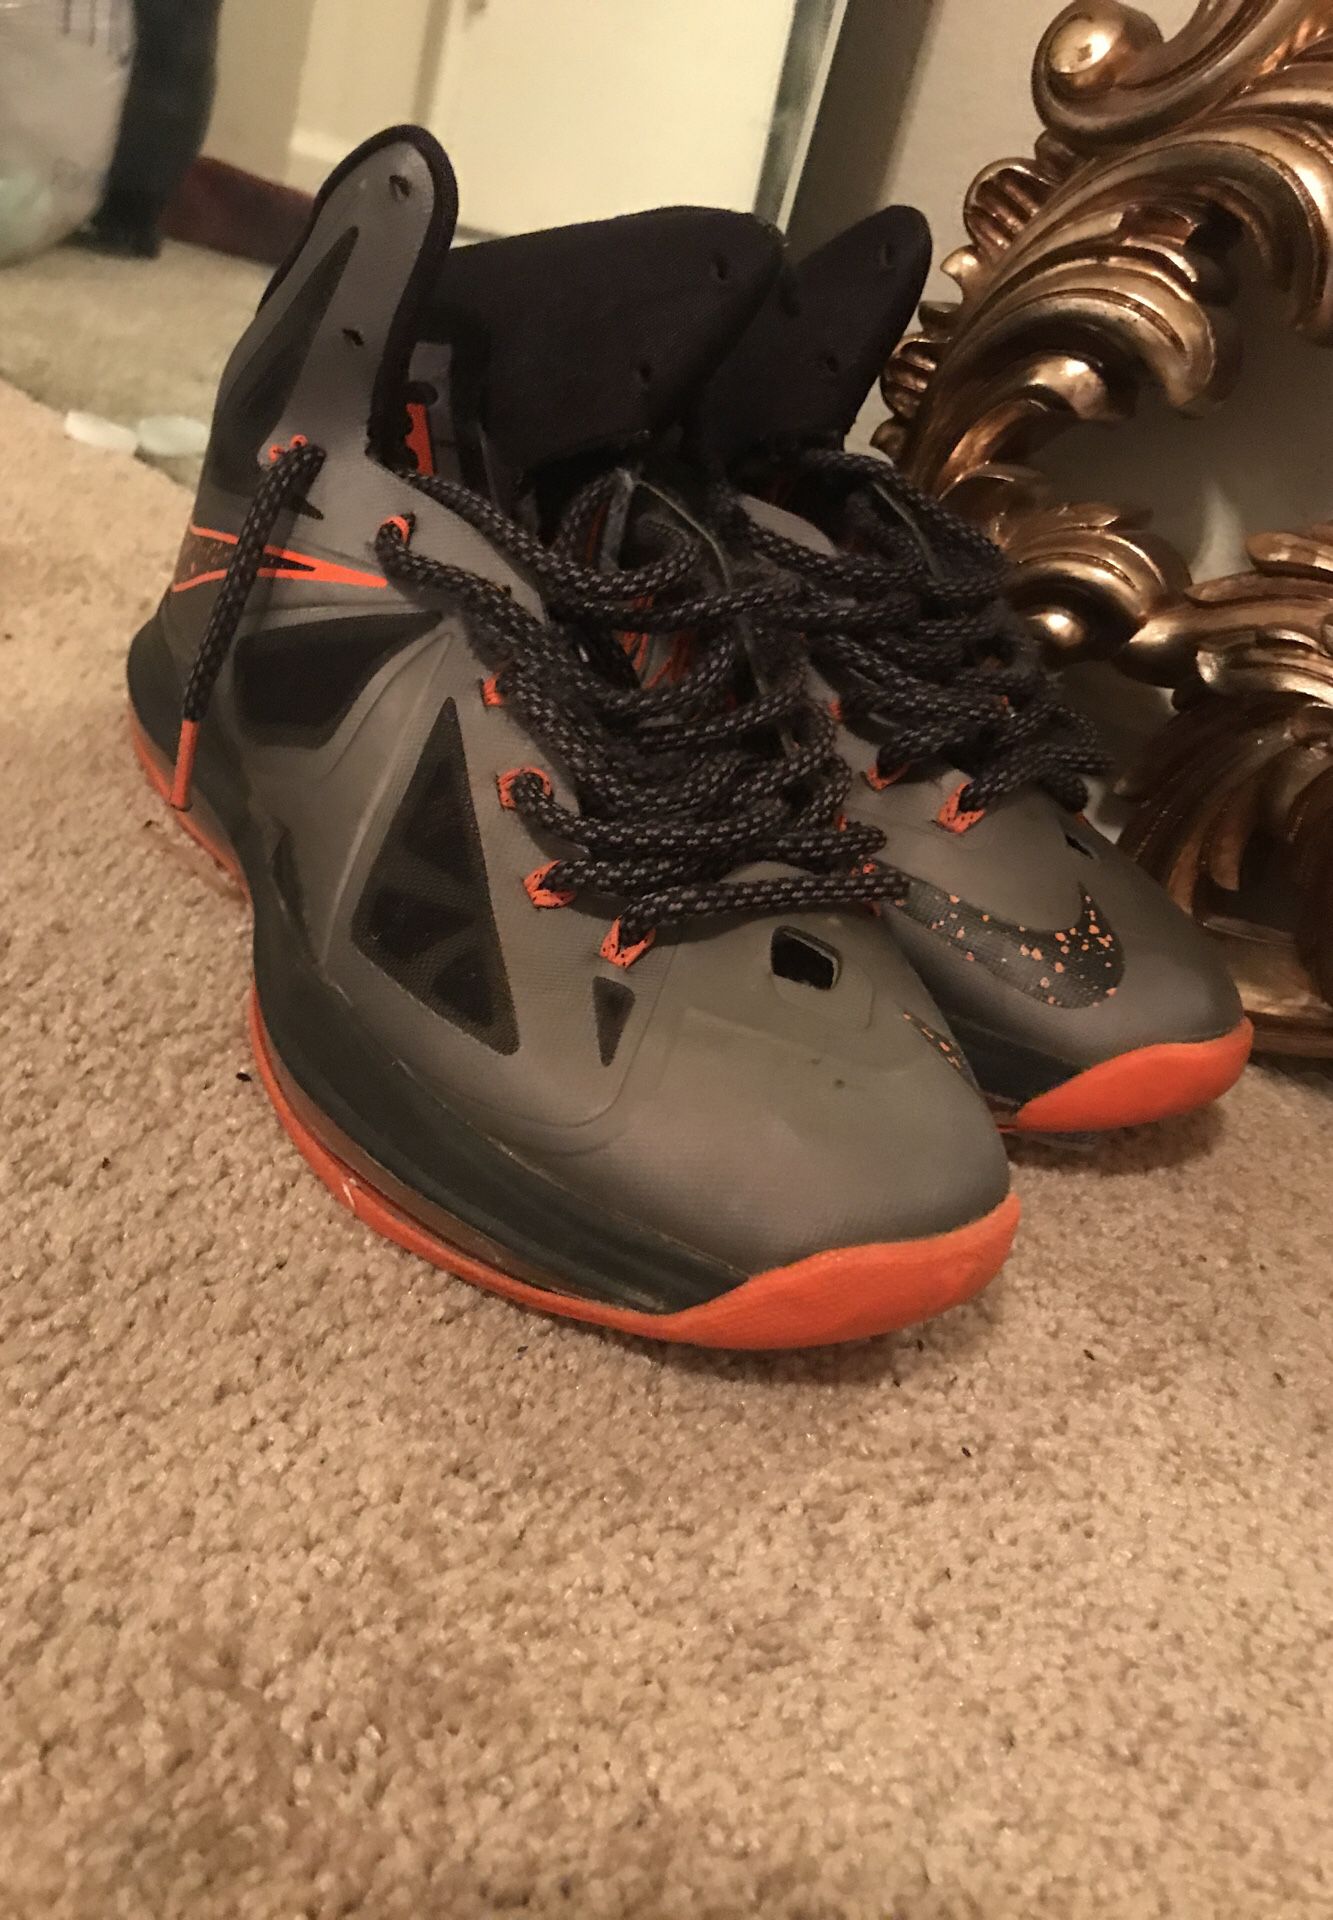 Lebrons size 9